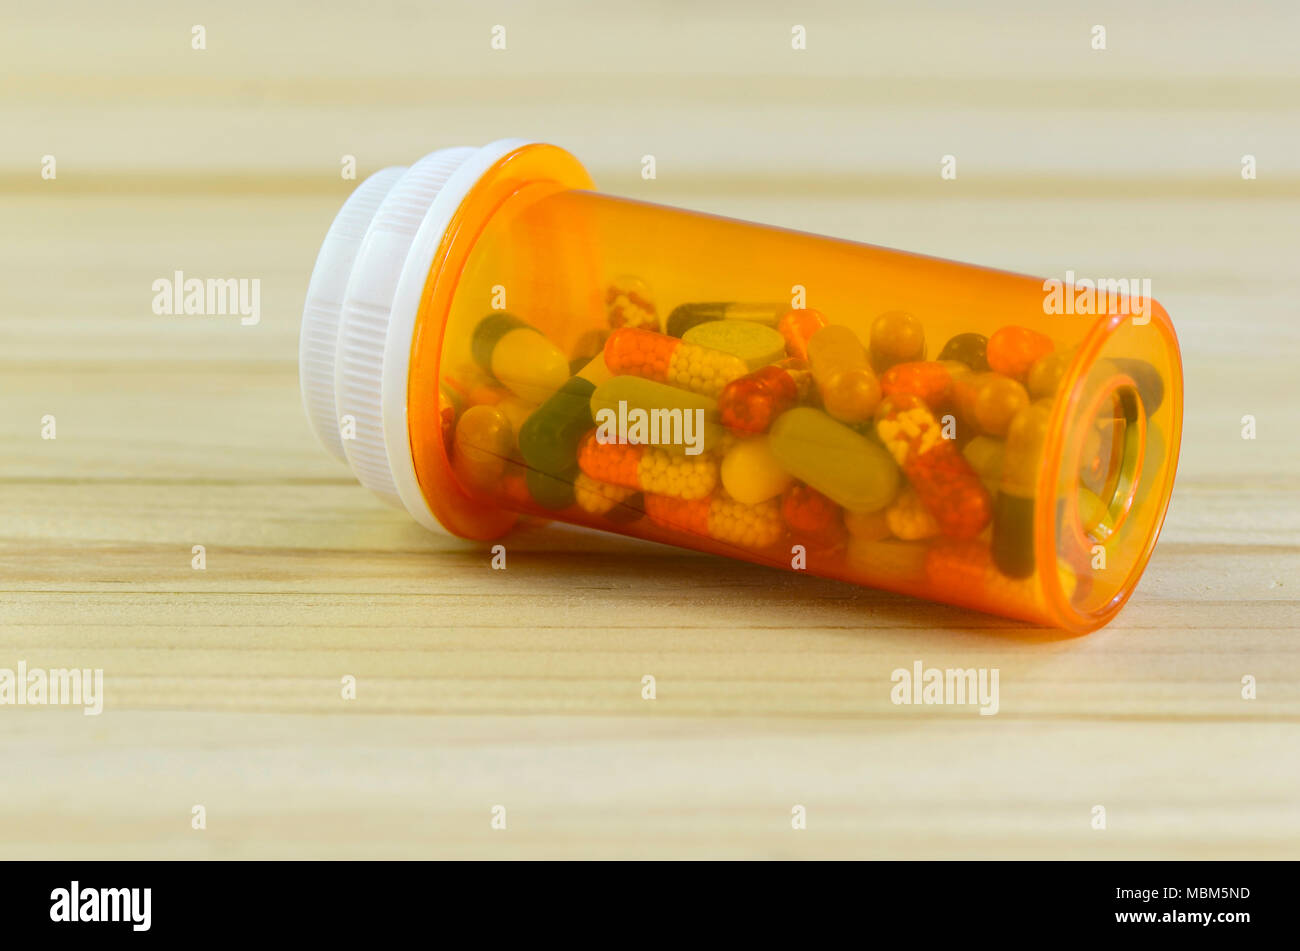 Oral medications in light protected bottle on pine wood table. Protect from light. Stock Photo